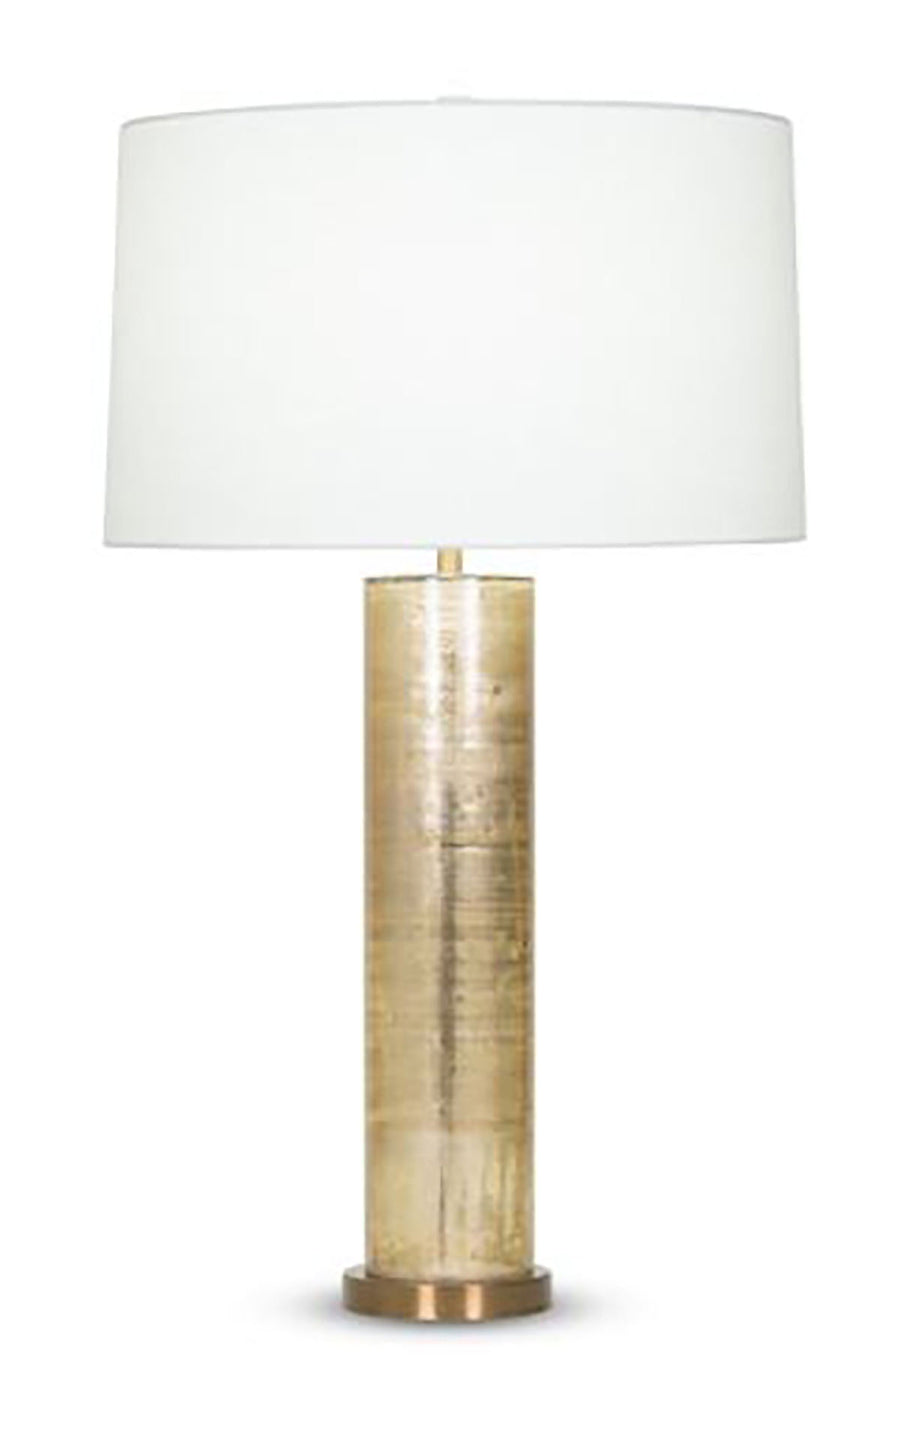 Melville Table Lamp with white drum shade, antique brass finished base and tall column body  handmade of mouth-blown glass with a Gold Metallic finish.